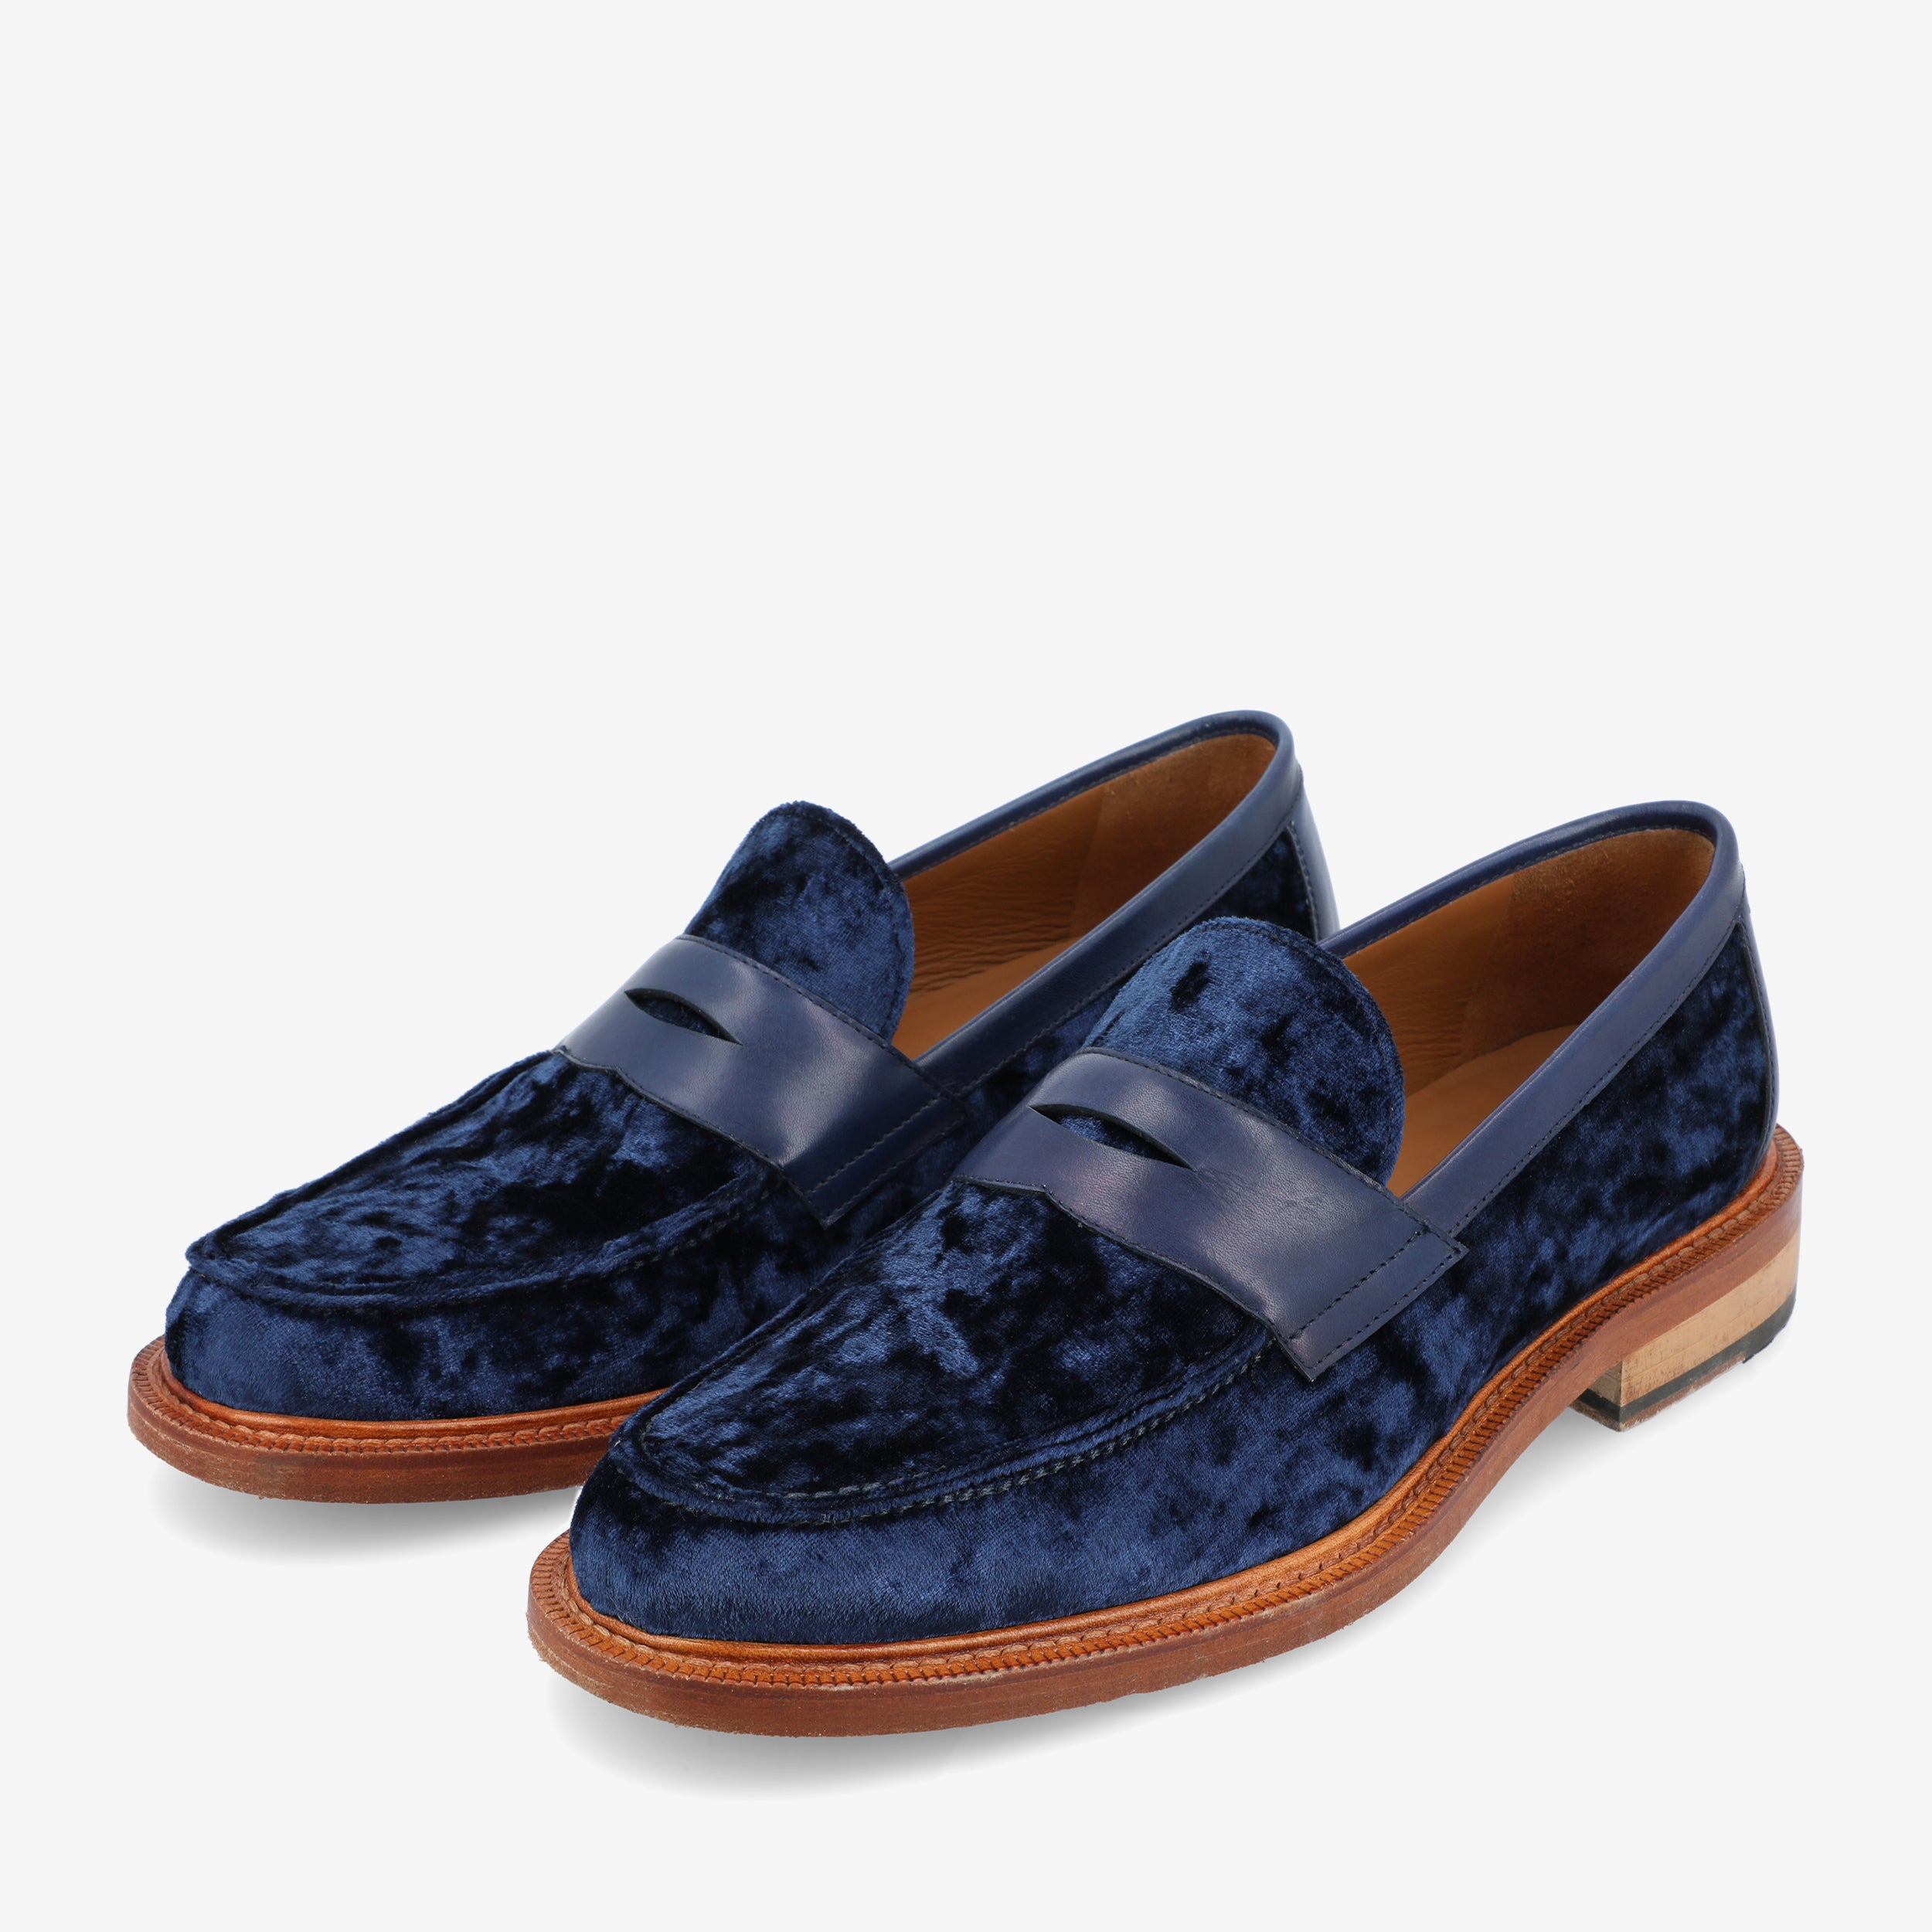 The Fitz Loafer in Deep Azure (Last Chance, Final Sale)